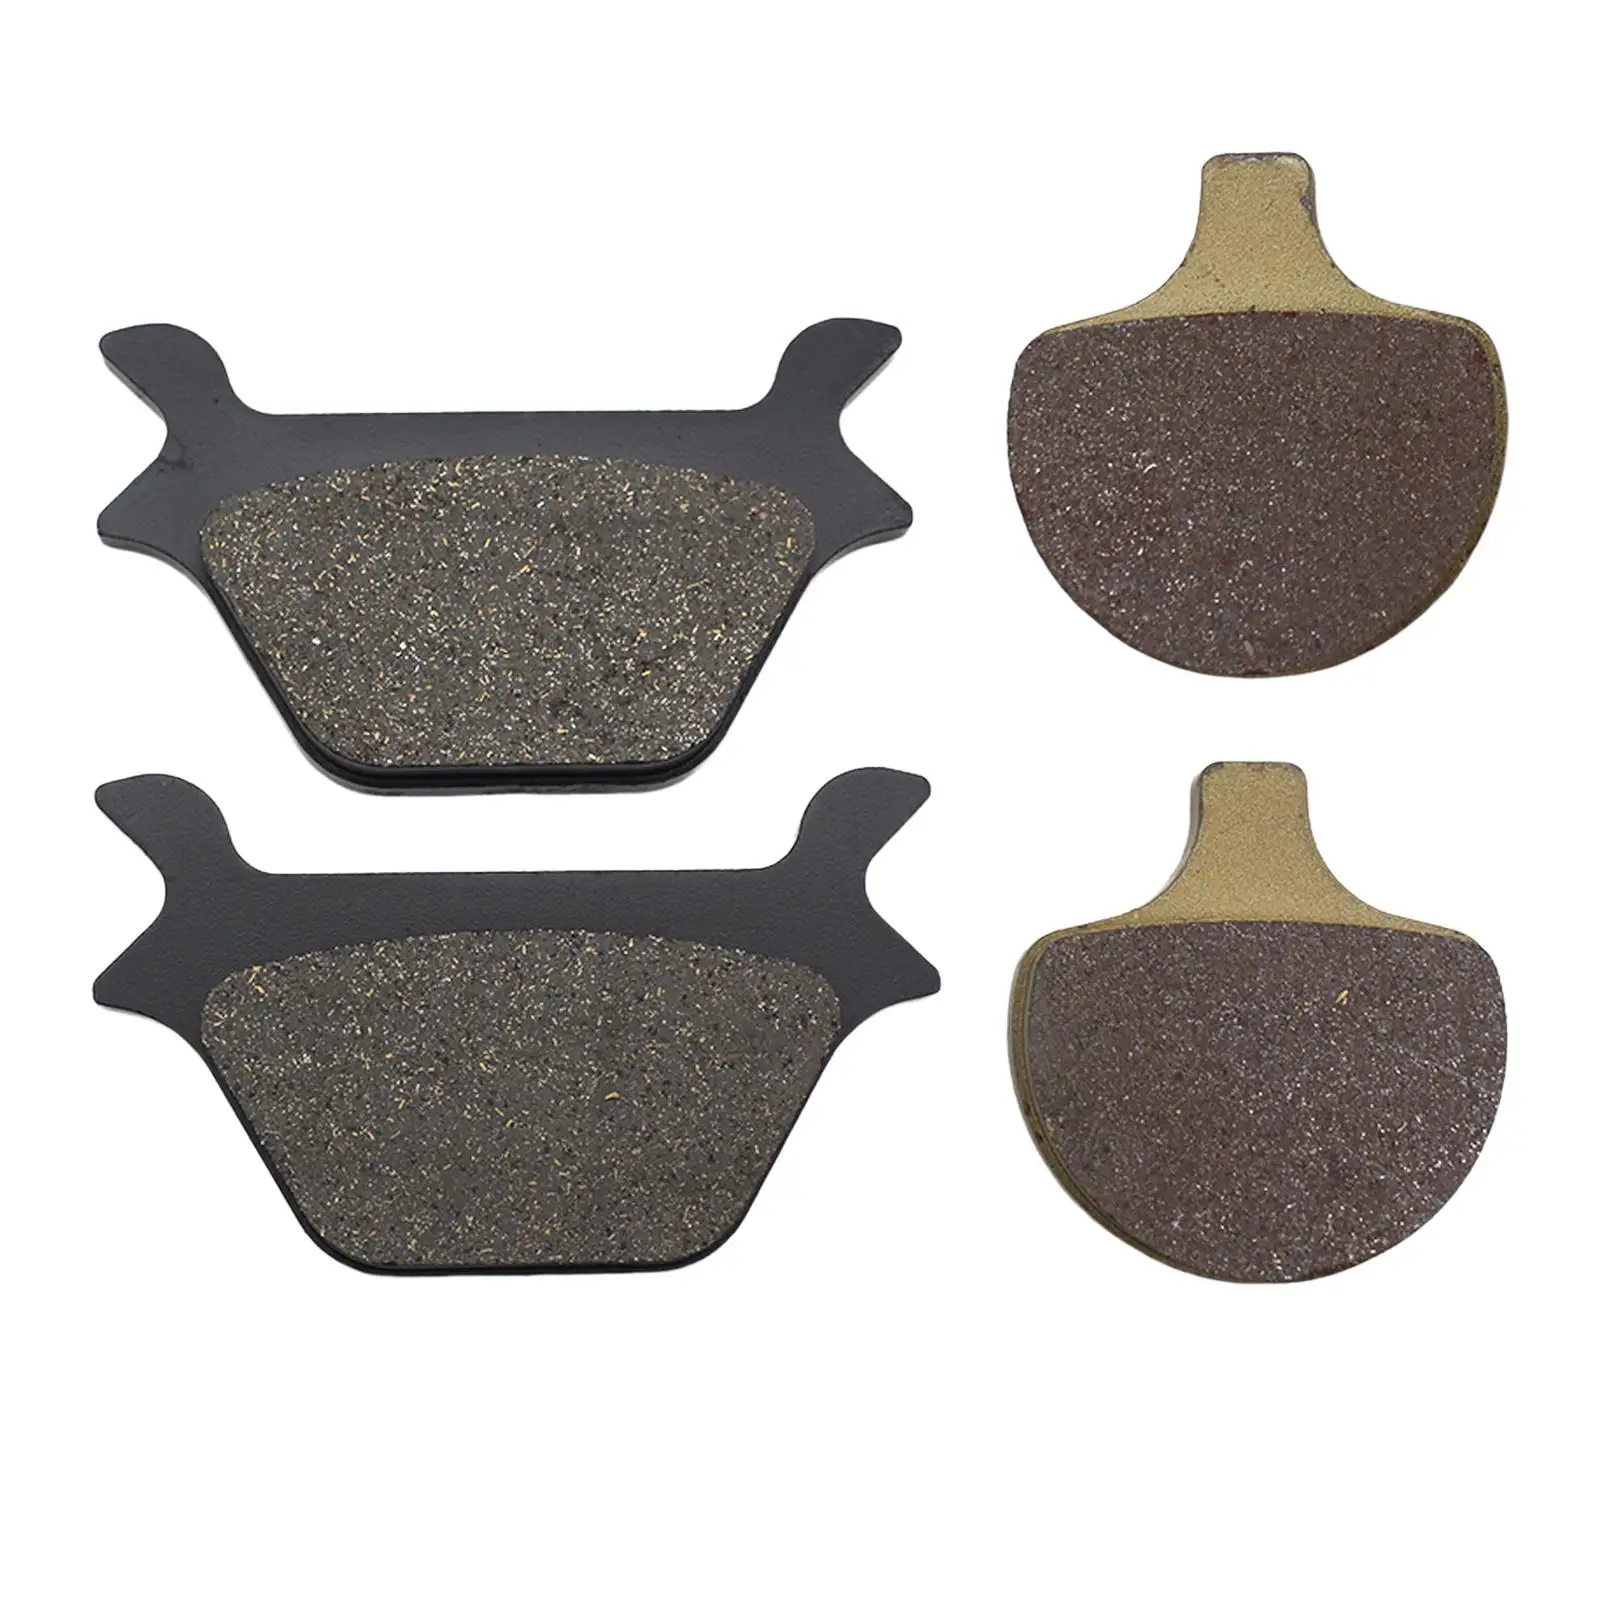 4Pcs Motorcycle Front Rear Brake Pads Wear Resistant Sturdy High Strength for